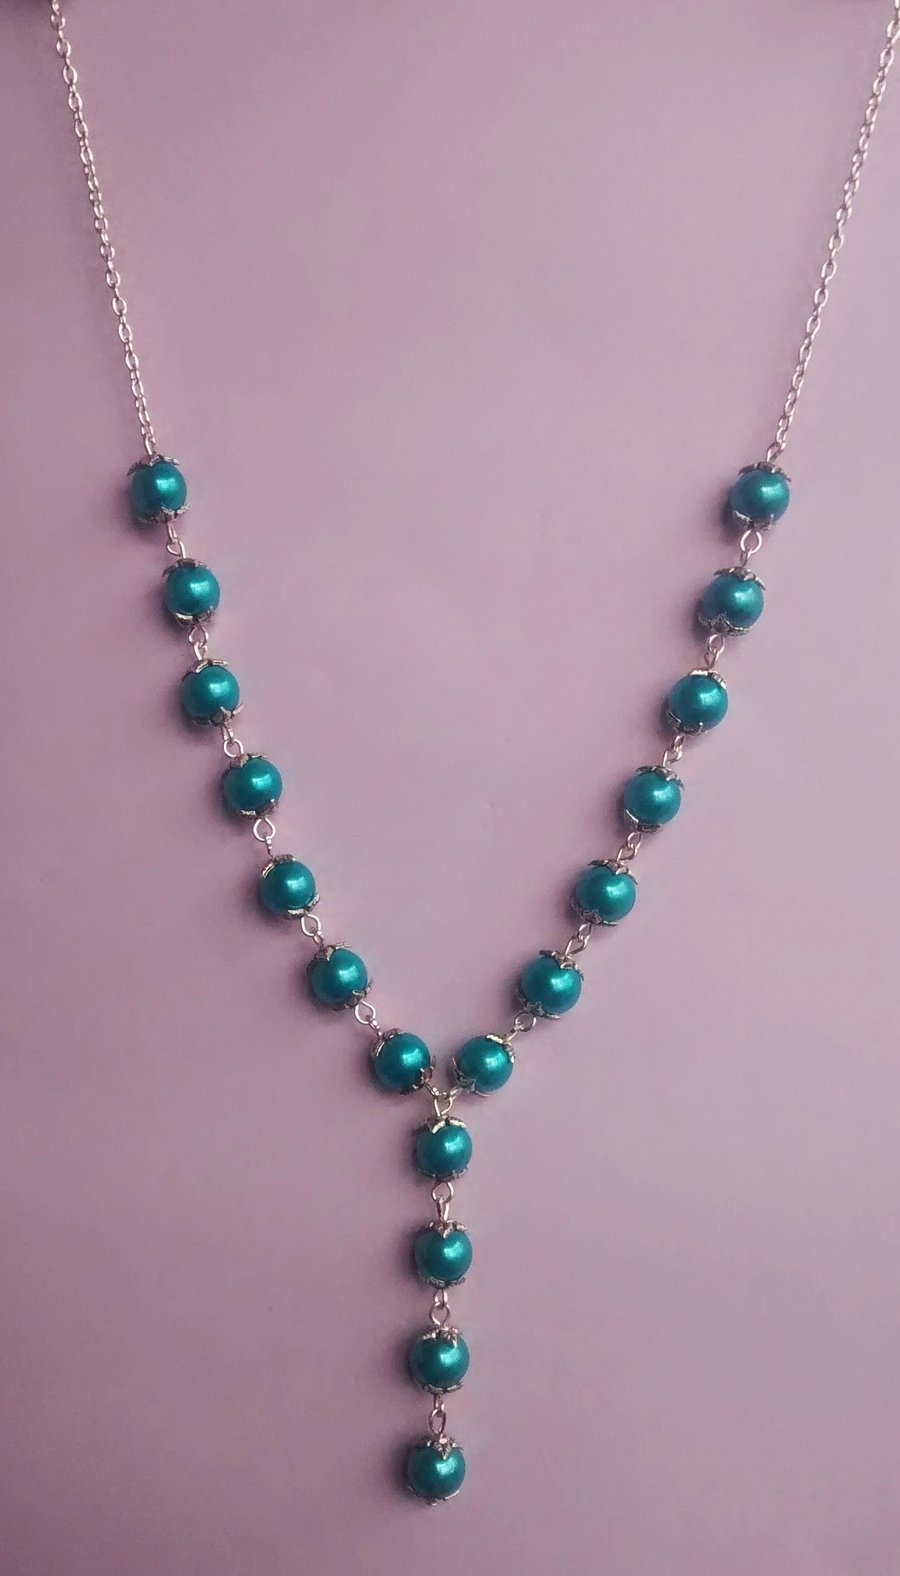 Vintage Style Turquoise Glass Pearl Y-shaped Dropper Necklace & Earring set